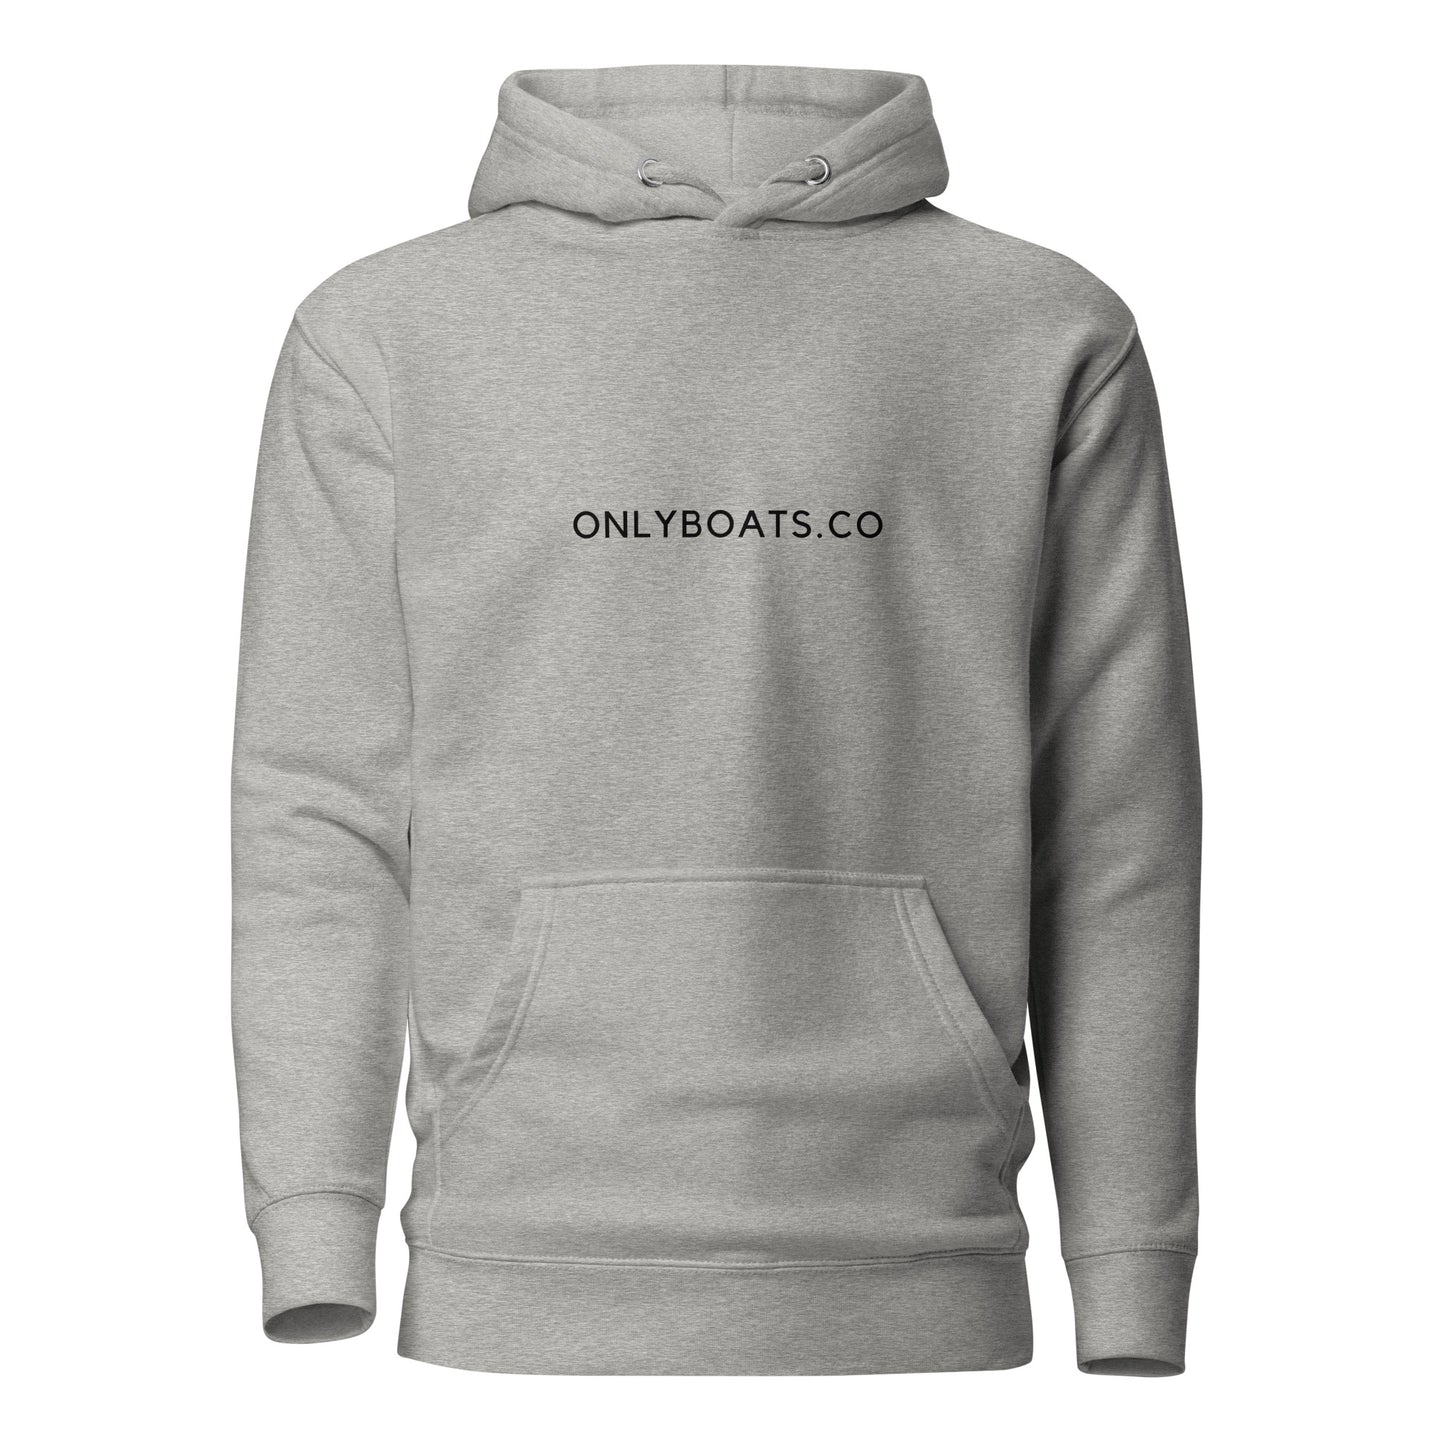 Onlyboats.co Hoodie